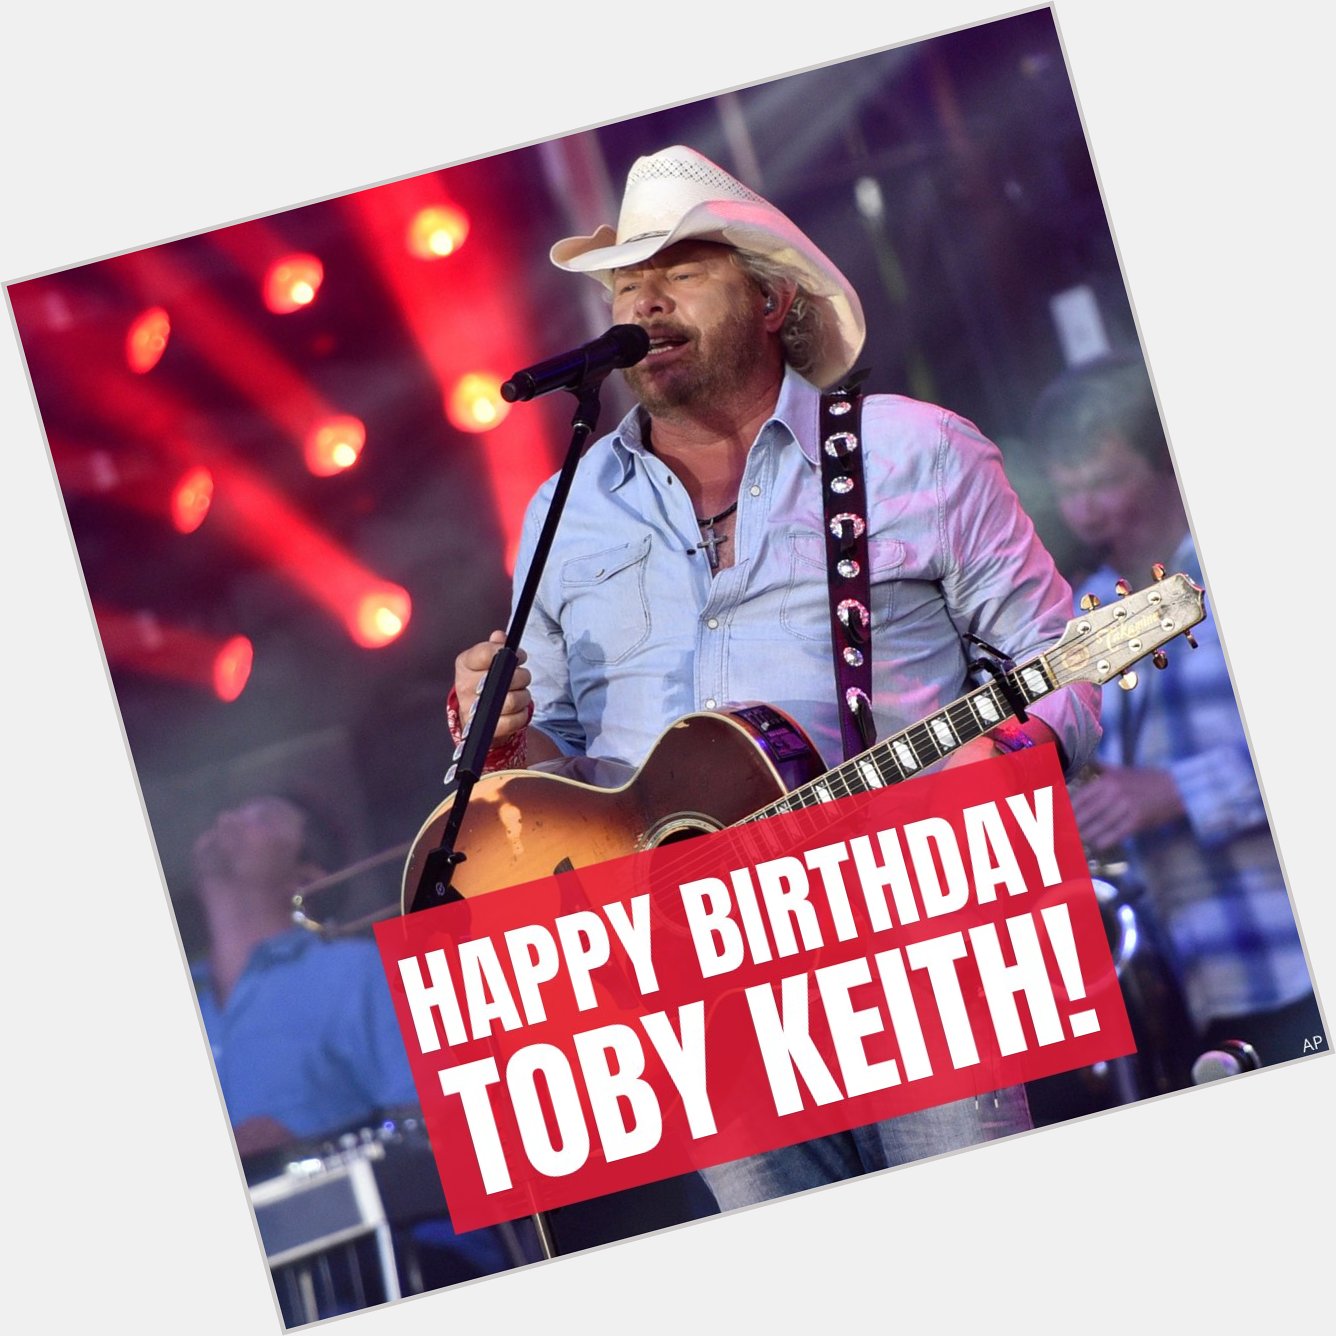  HAPPY BIRTHDAY Country music star Toby Keith turns 59 today. 